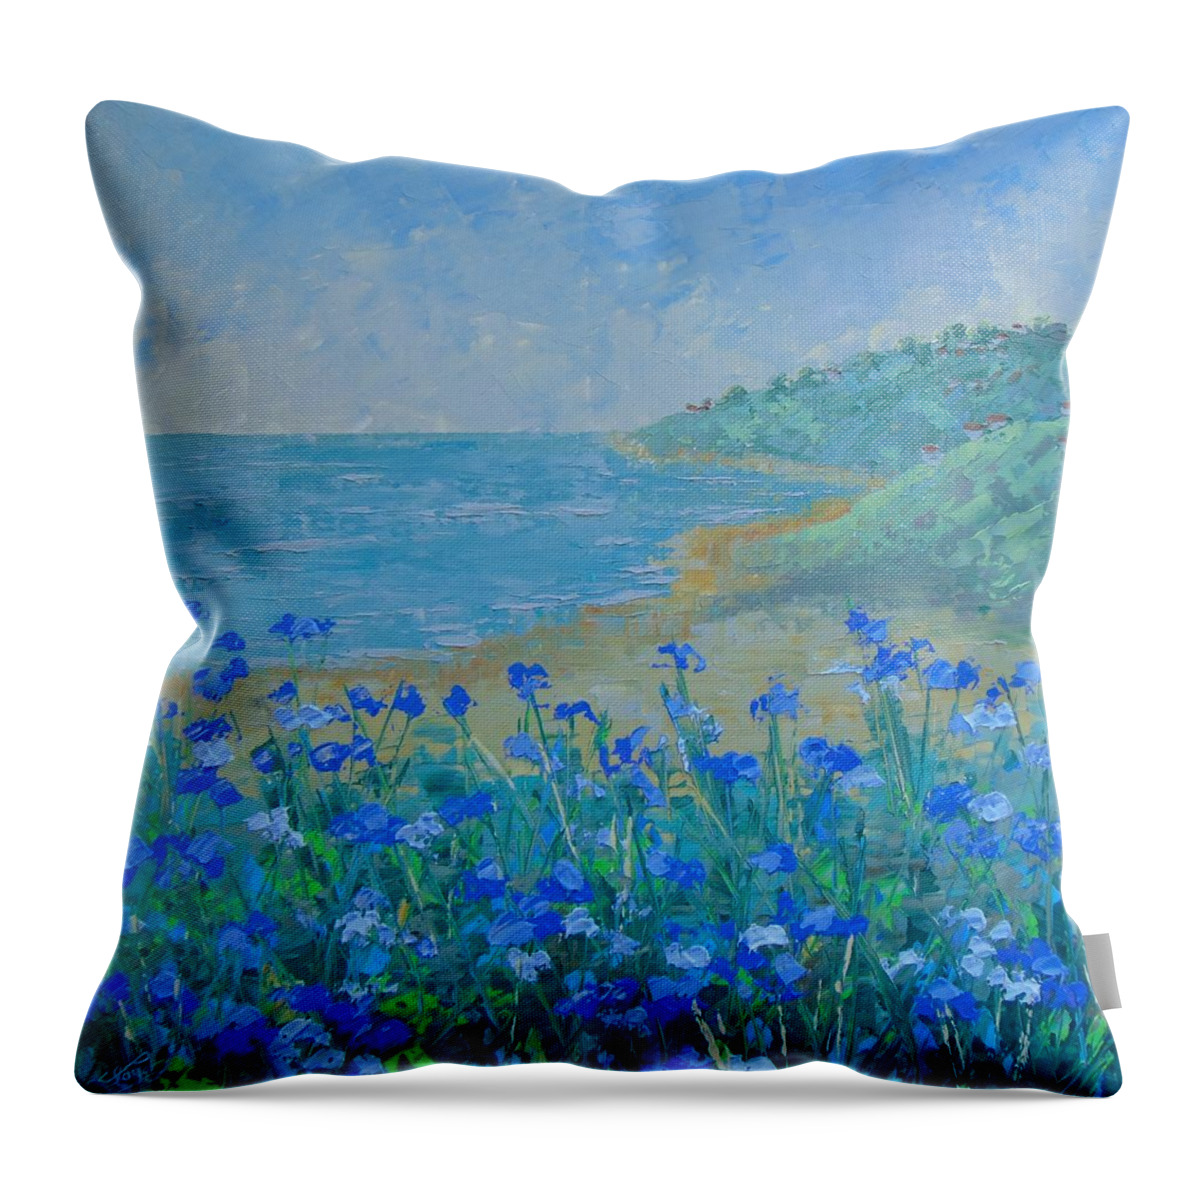 Floral Throw Pillow featuring the painting La riviera France by Frederic Payet